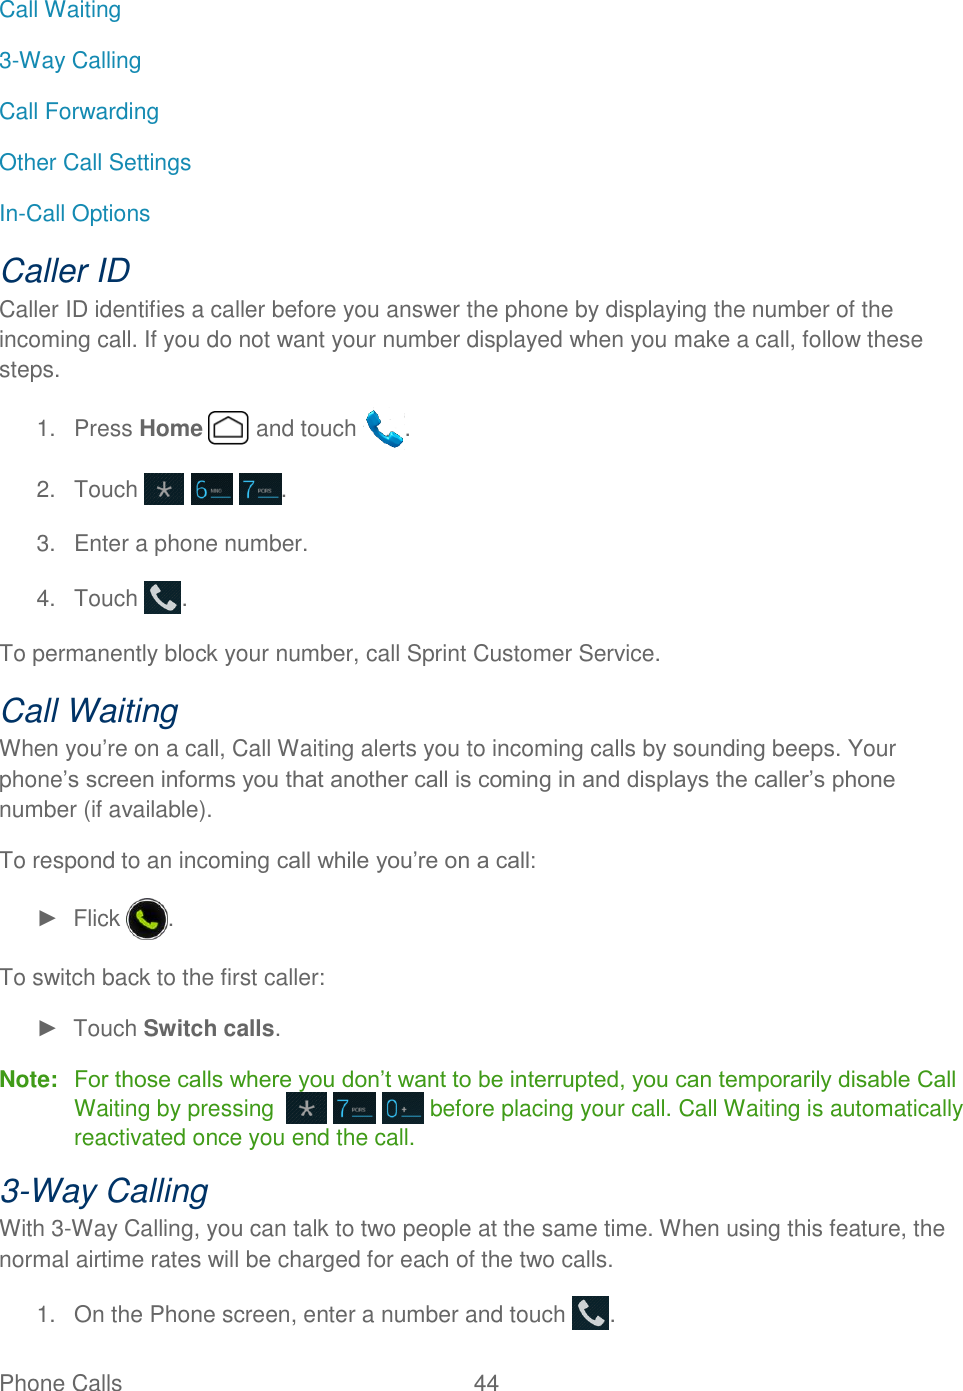  Phone Calls  44   Call Waiting 3-Way Calling Call Forwarding Other Call Settings In-Call Options Caller ID Caller ID identifies a caller before you answer the phone by displaying the number of the incoming call. If you do not want your number displayed when you make a call, follow these steps. 1.  Press Home   and touch  . 2.  Touch      . 3.  Enter a phone number. 4.  Touch  . To permanently block your number, call Sprint Customer Service. Call Waiting When you’re on a call, Call Waiting alerts you to incoming calls by sounding beeps. Your phone’s screen informs you that another call is coming in and displays the caller’s phone number (if available). To respond to an incoming call while you’re on a call: ►  Flick  . To switch back to the first caller: ►  Touch Switch calls. Note:  For those calls where you don’t want to be interrupted, you can temporarily disable Call Waiting by pressing        before placing your call. Call Waiting is automatically reactivated once you end the call. 3-Way Calling With 3-Way Calling, you can talk to two people at the same time. When using this feature, the normal airtime rates will be charged for each of the two calls. 1.  On the Phone screen, enter a number and touch  . 